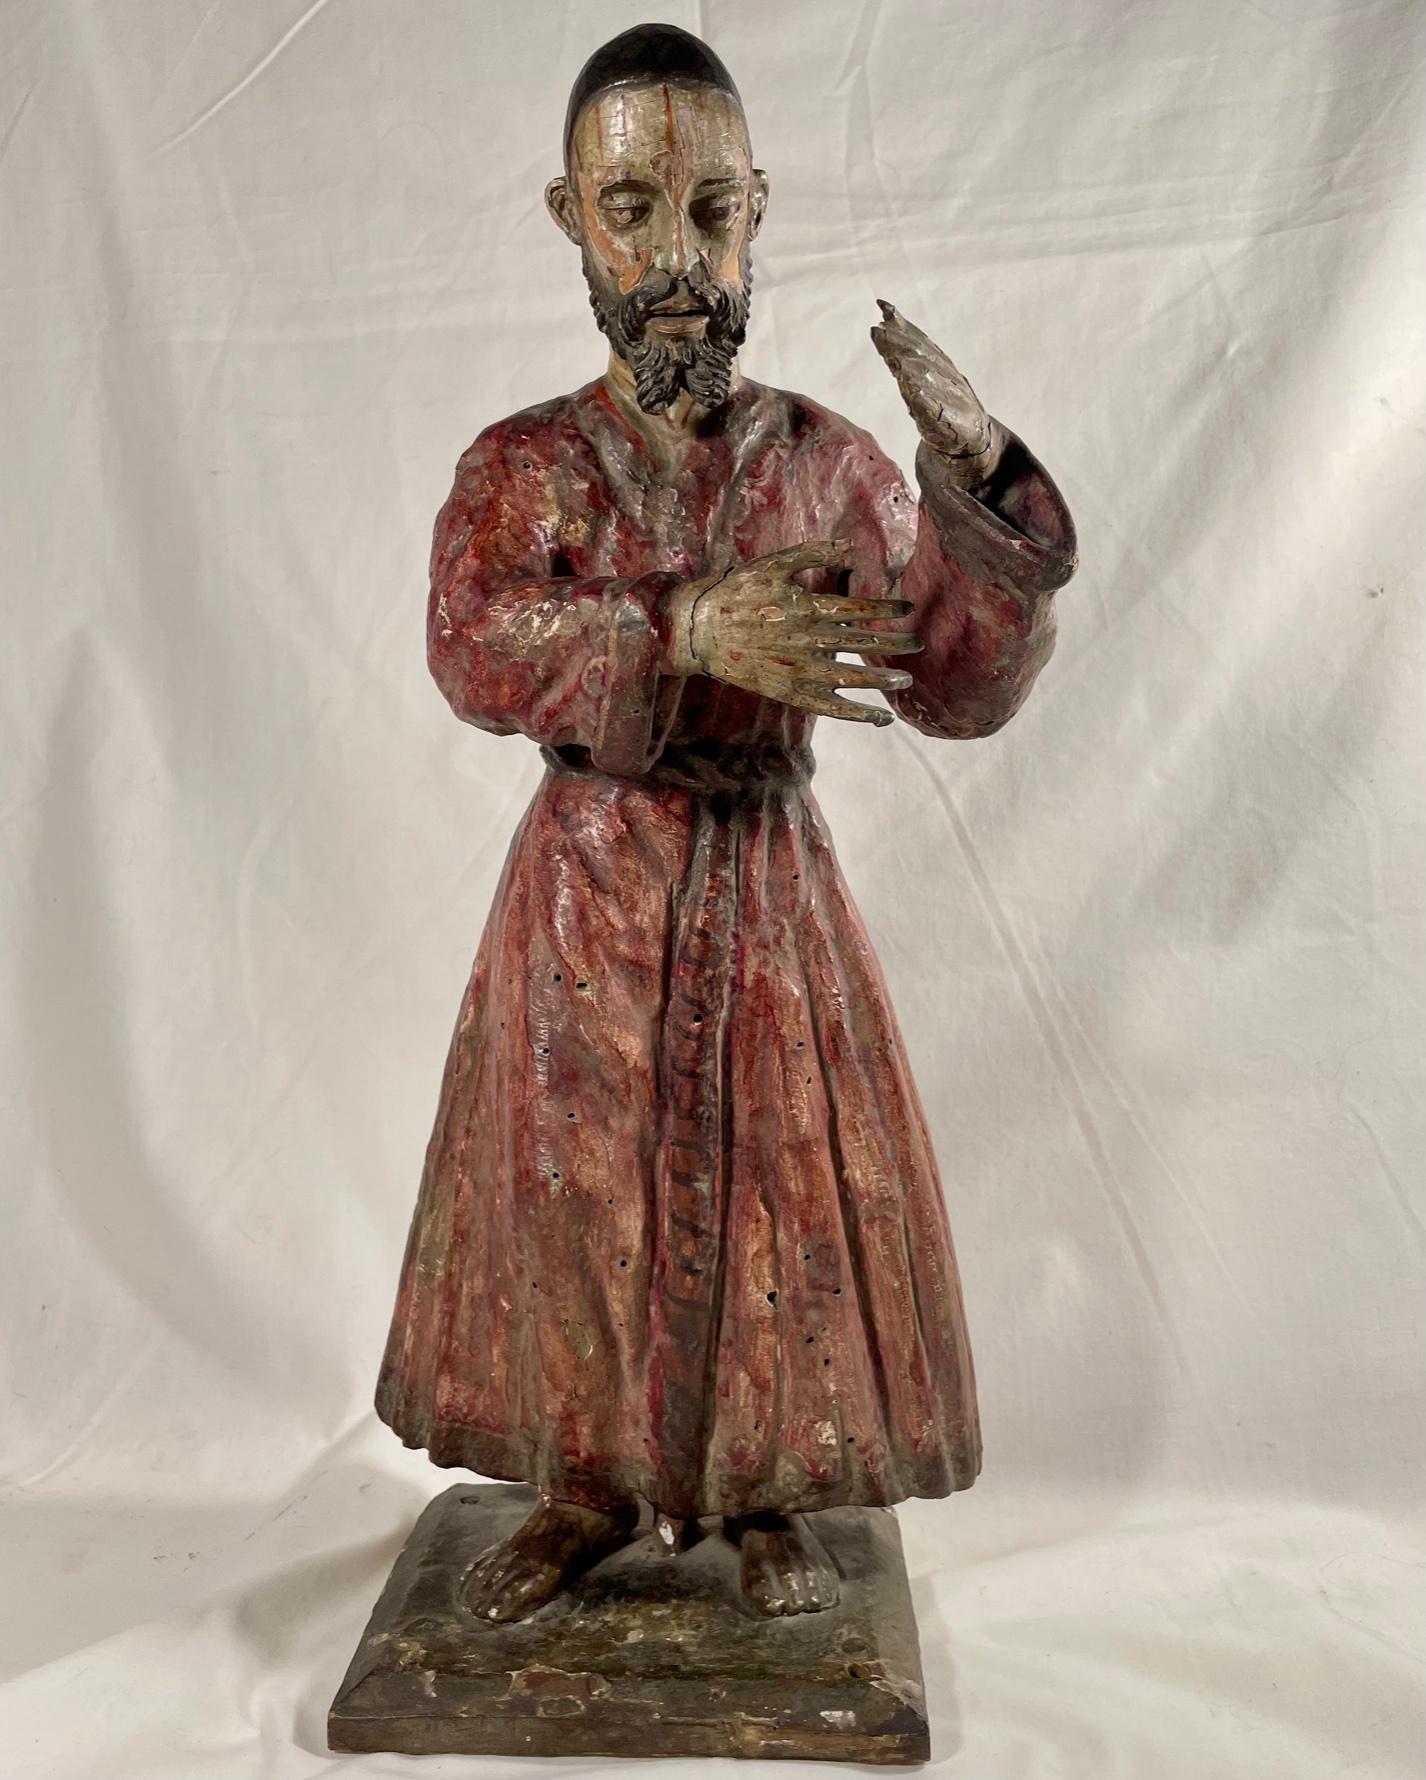 Late 18th century carved and polychrome Italian Santo statue

Antique Italian religious hand carved wood Santos of Saint John. This exceptional Baroque style figure of the late 18th century is beautifully decorated with polychrome paint. Minor